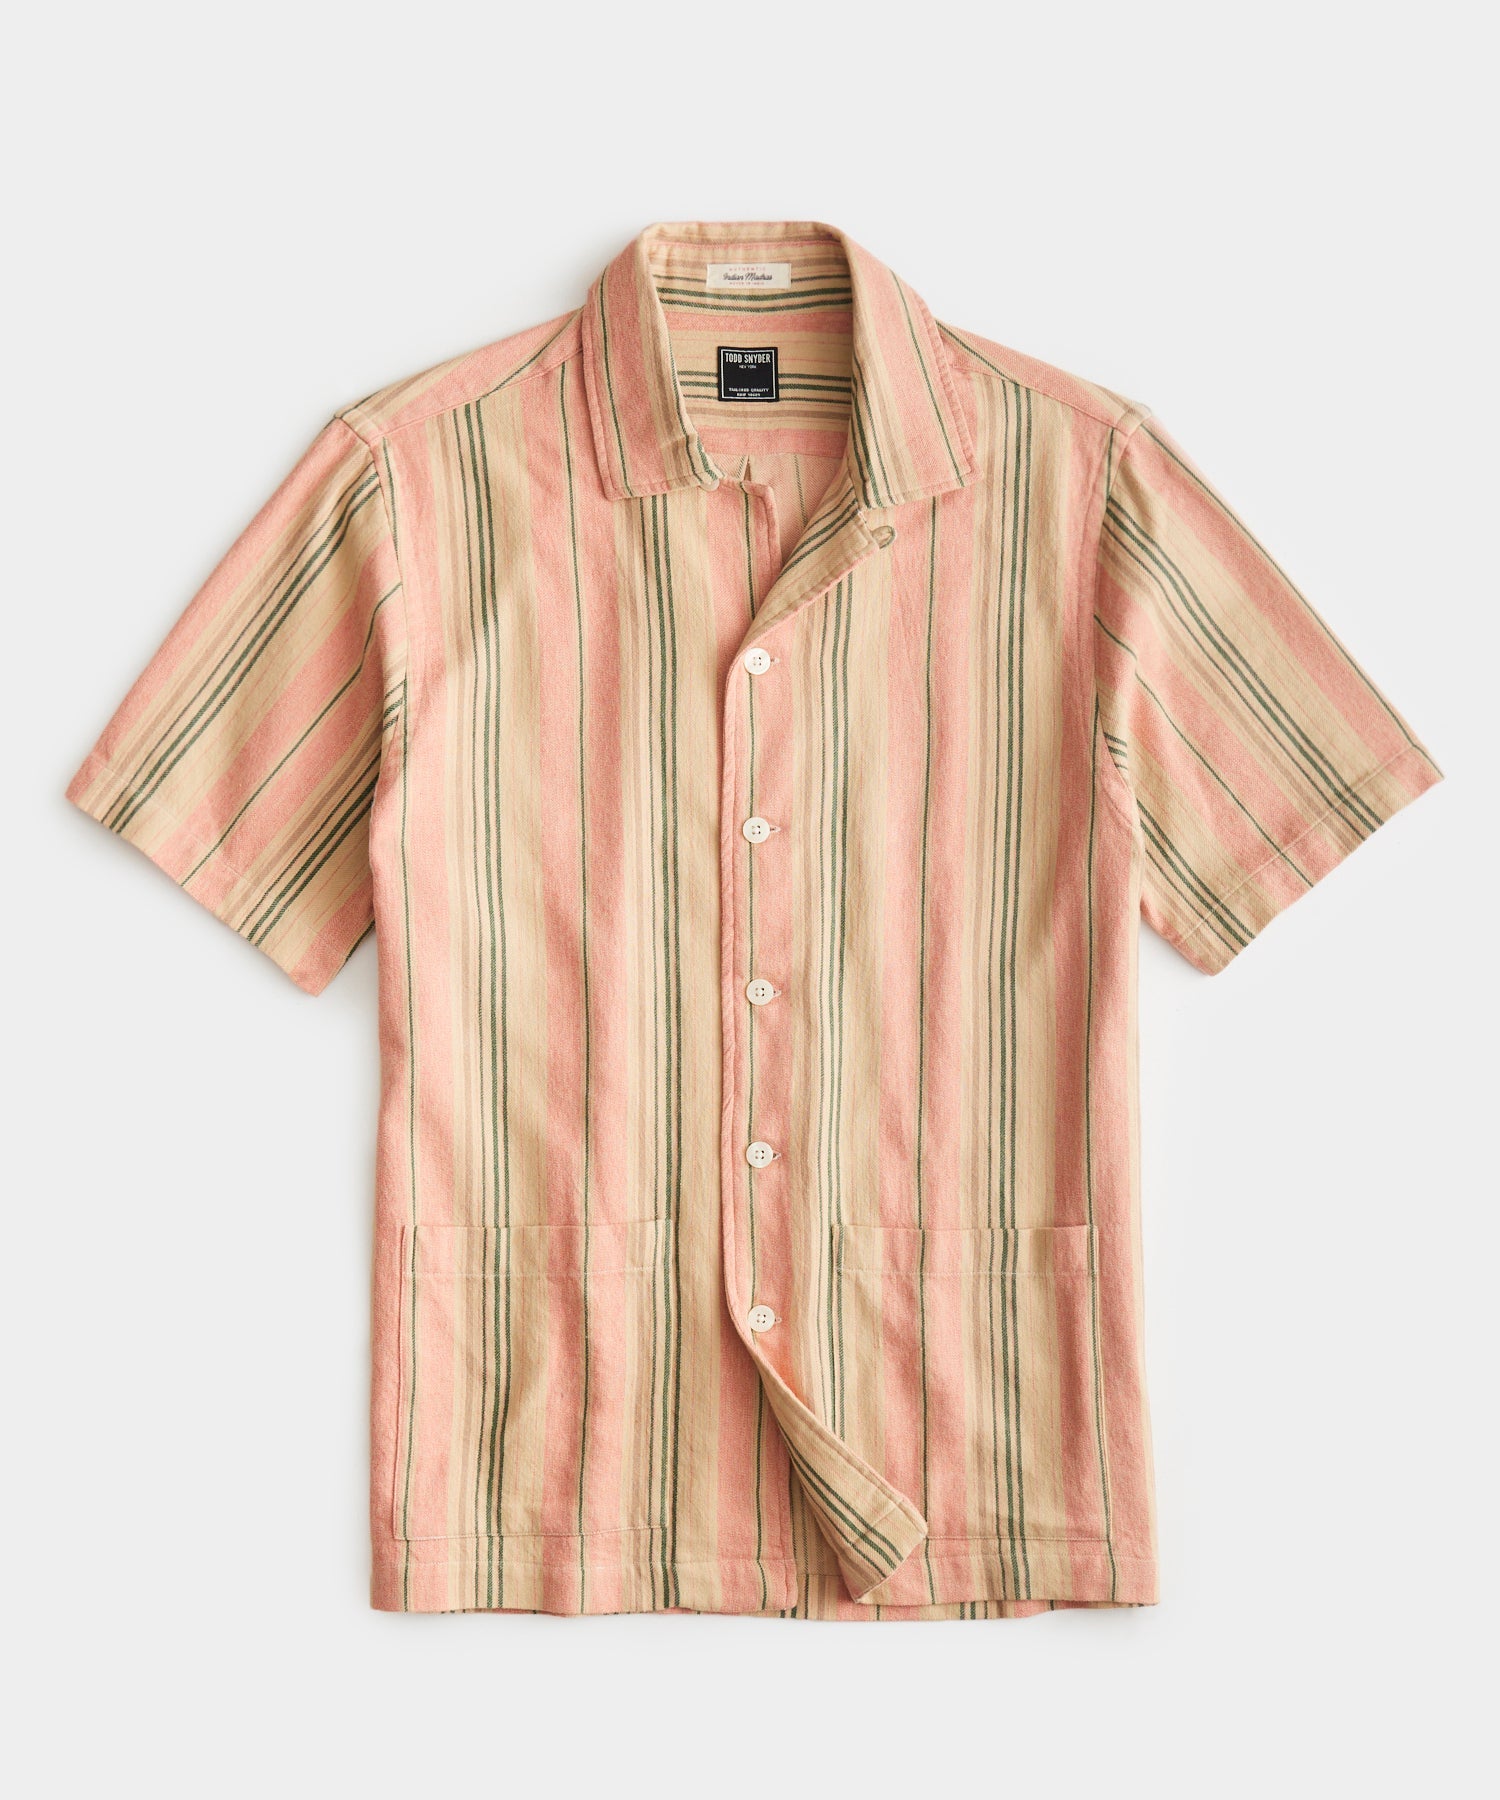 3.22 Shop The Look: Test Drive It On Vacation(Pink Stripe Short Sleeve Leisure Shirt, SH952737-601)